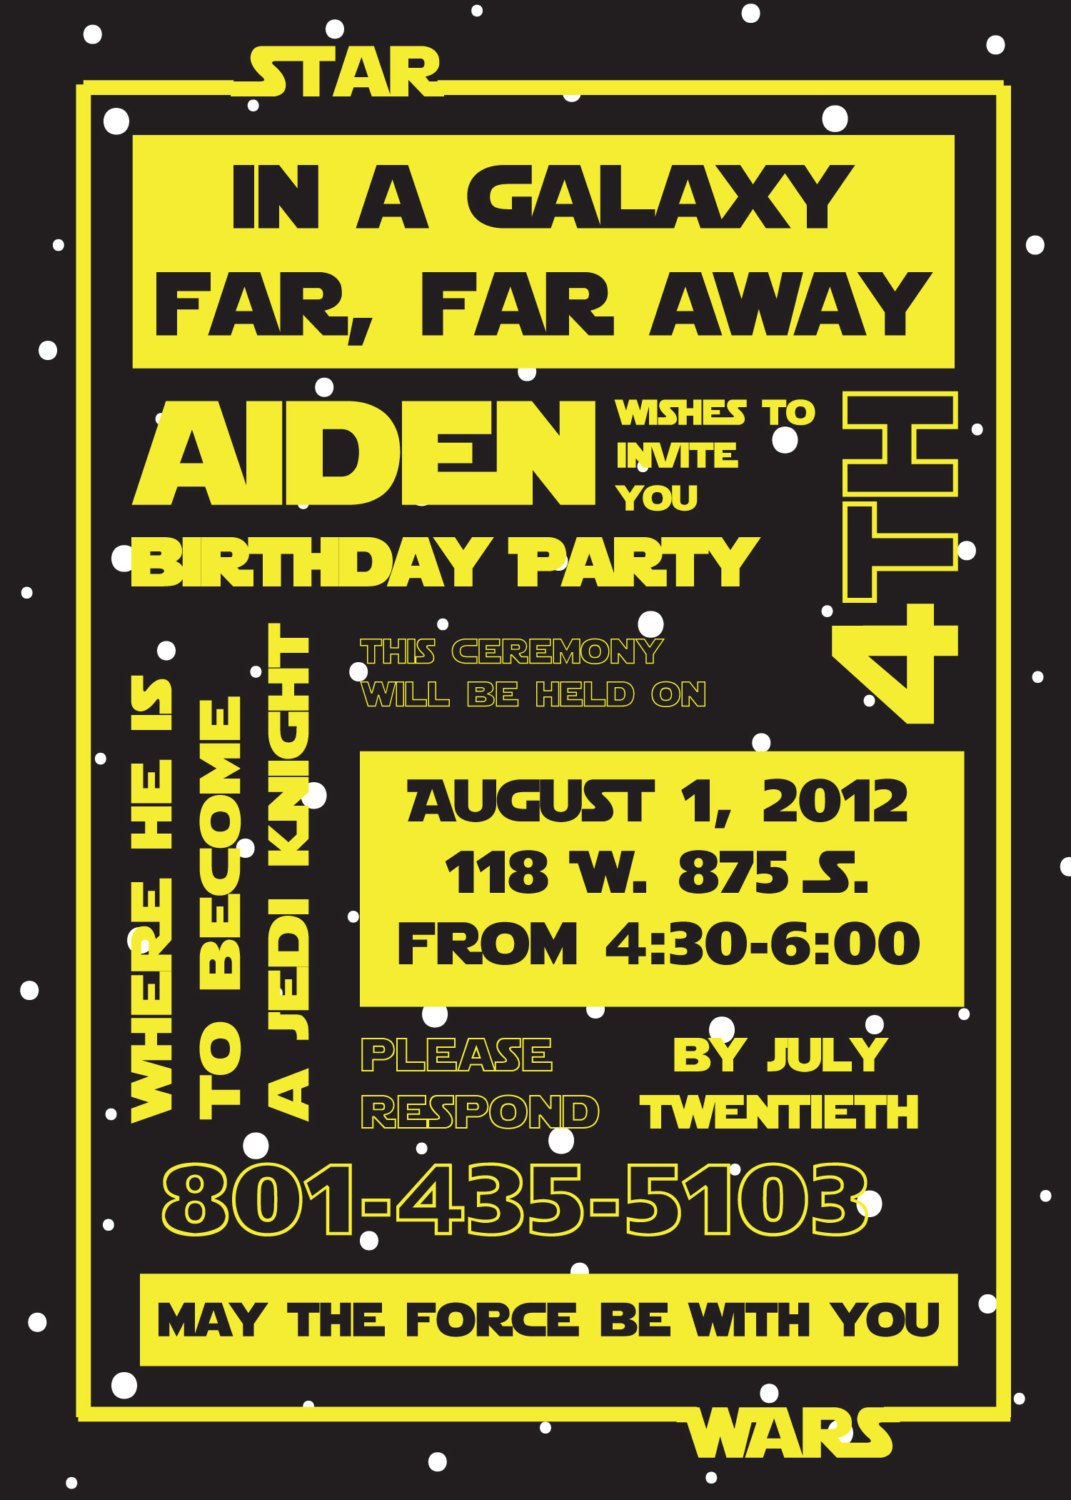 Printable Star Wars Invitation and Party Banner by susieandme